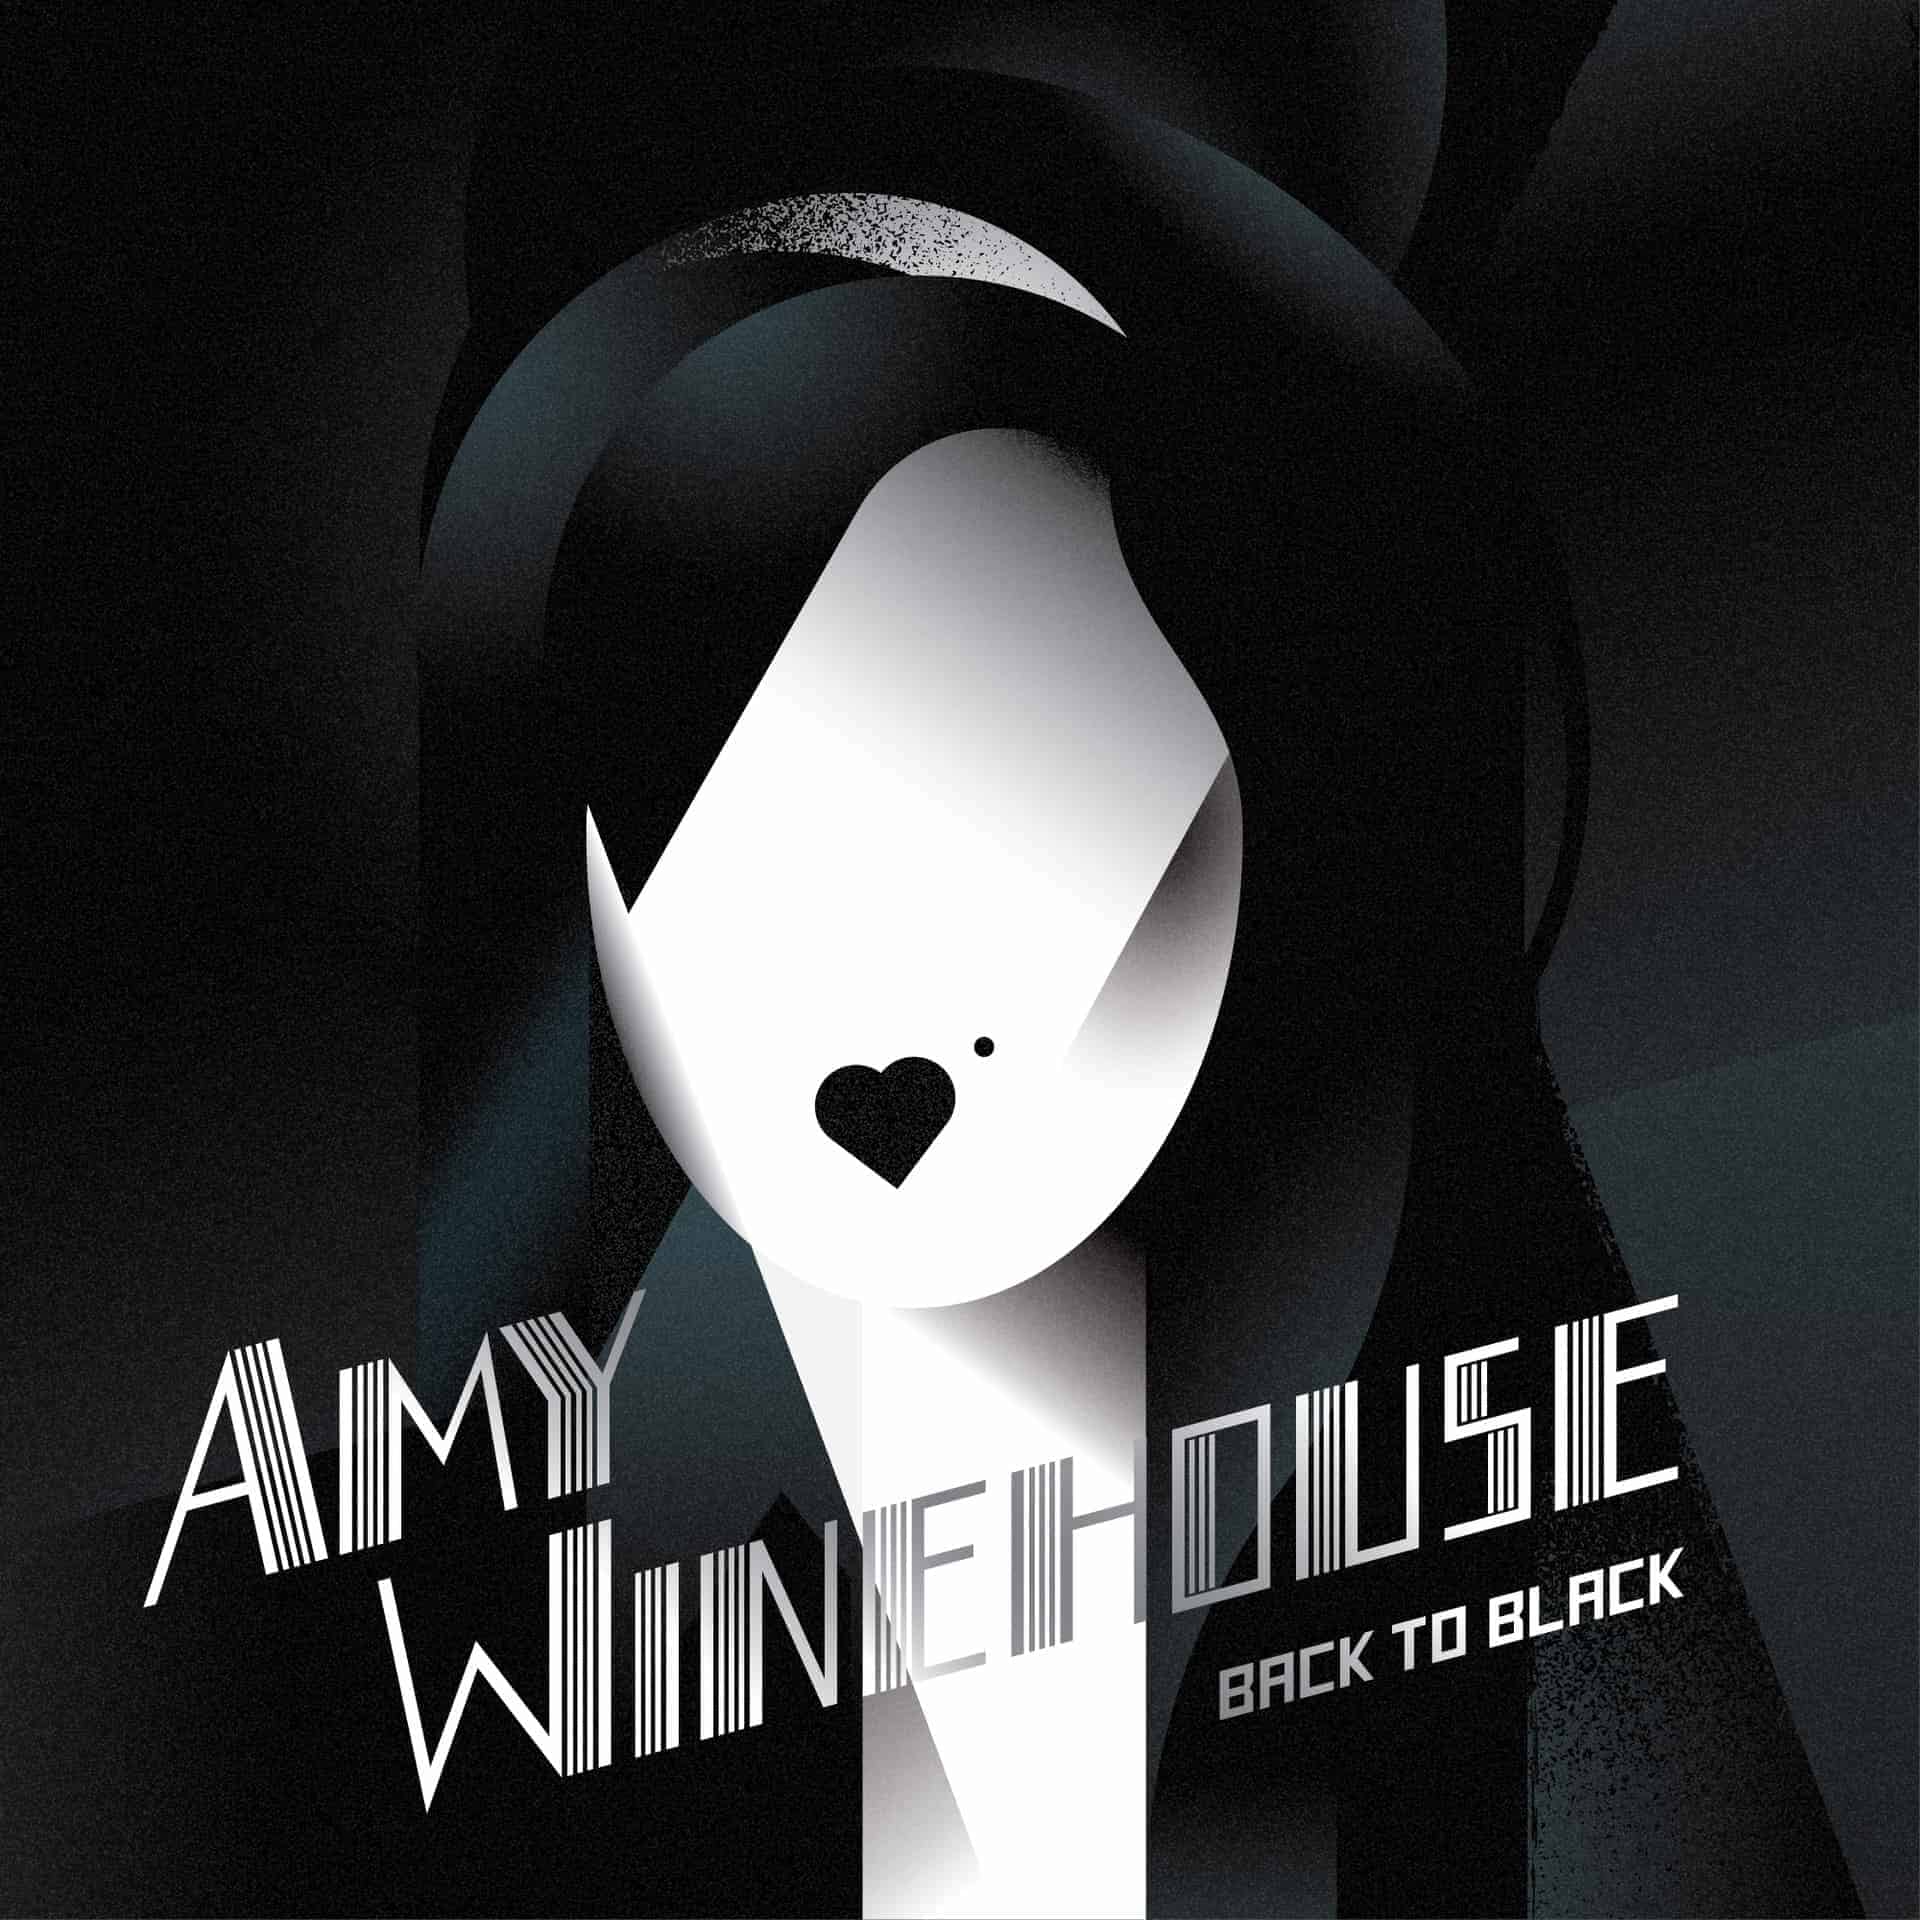 The Redesign of the Legendary 'BACK to BLACK' Record Cover of Amy Winehouse